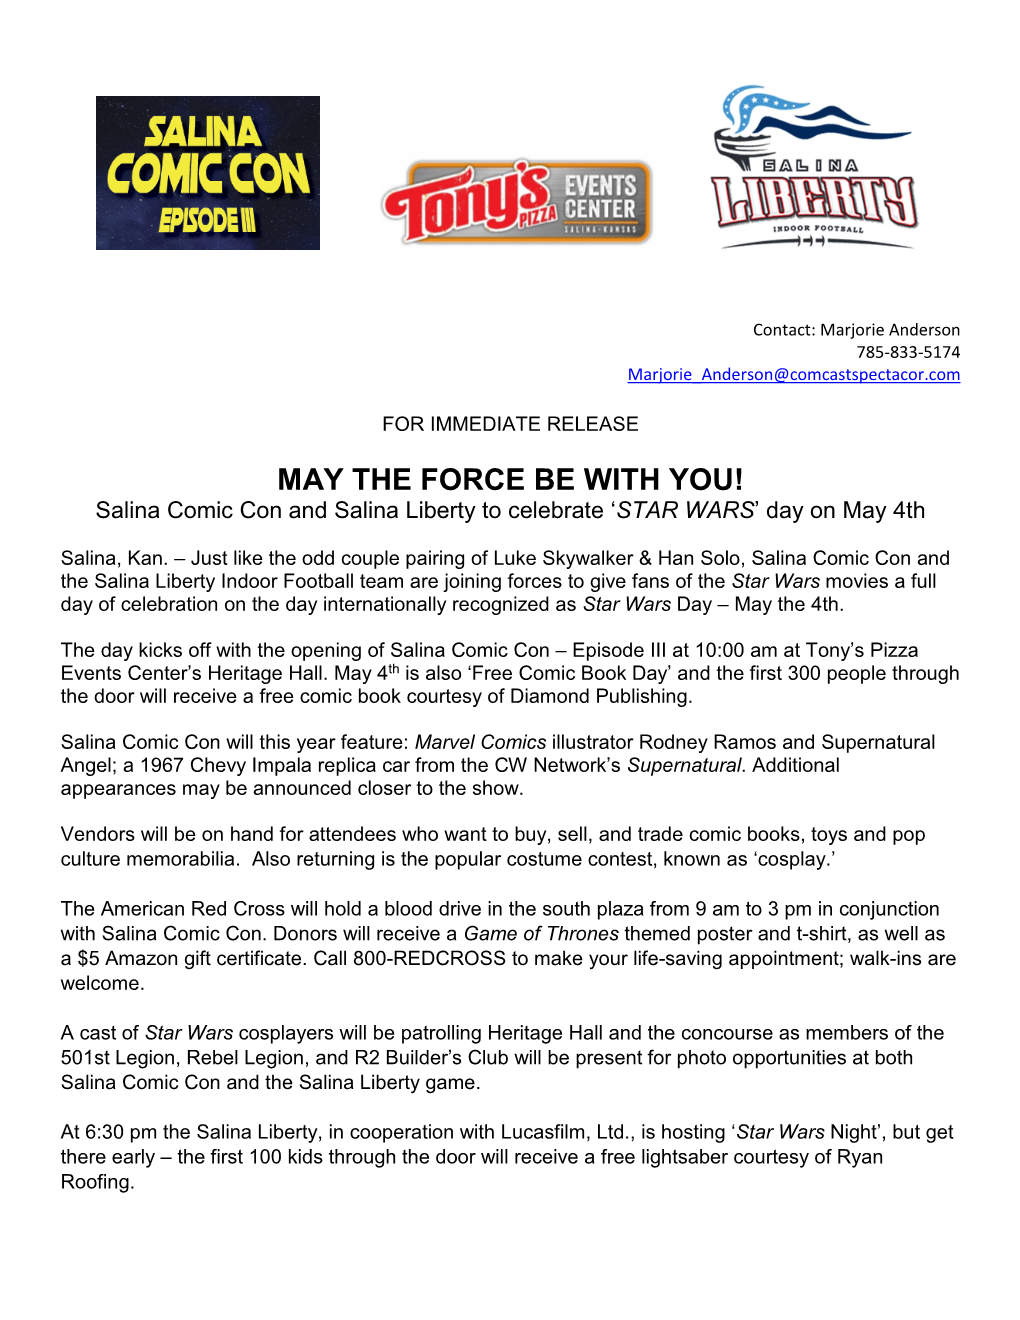 MAY the FORCE BE with YOU! Salina Comic Con and Salina Liberty to Celebrate ‘STAR WARS’ Day on May 4Th